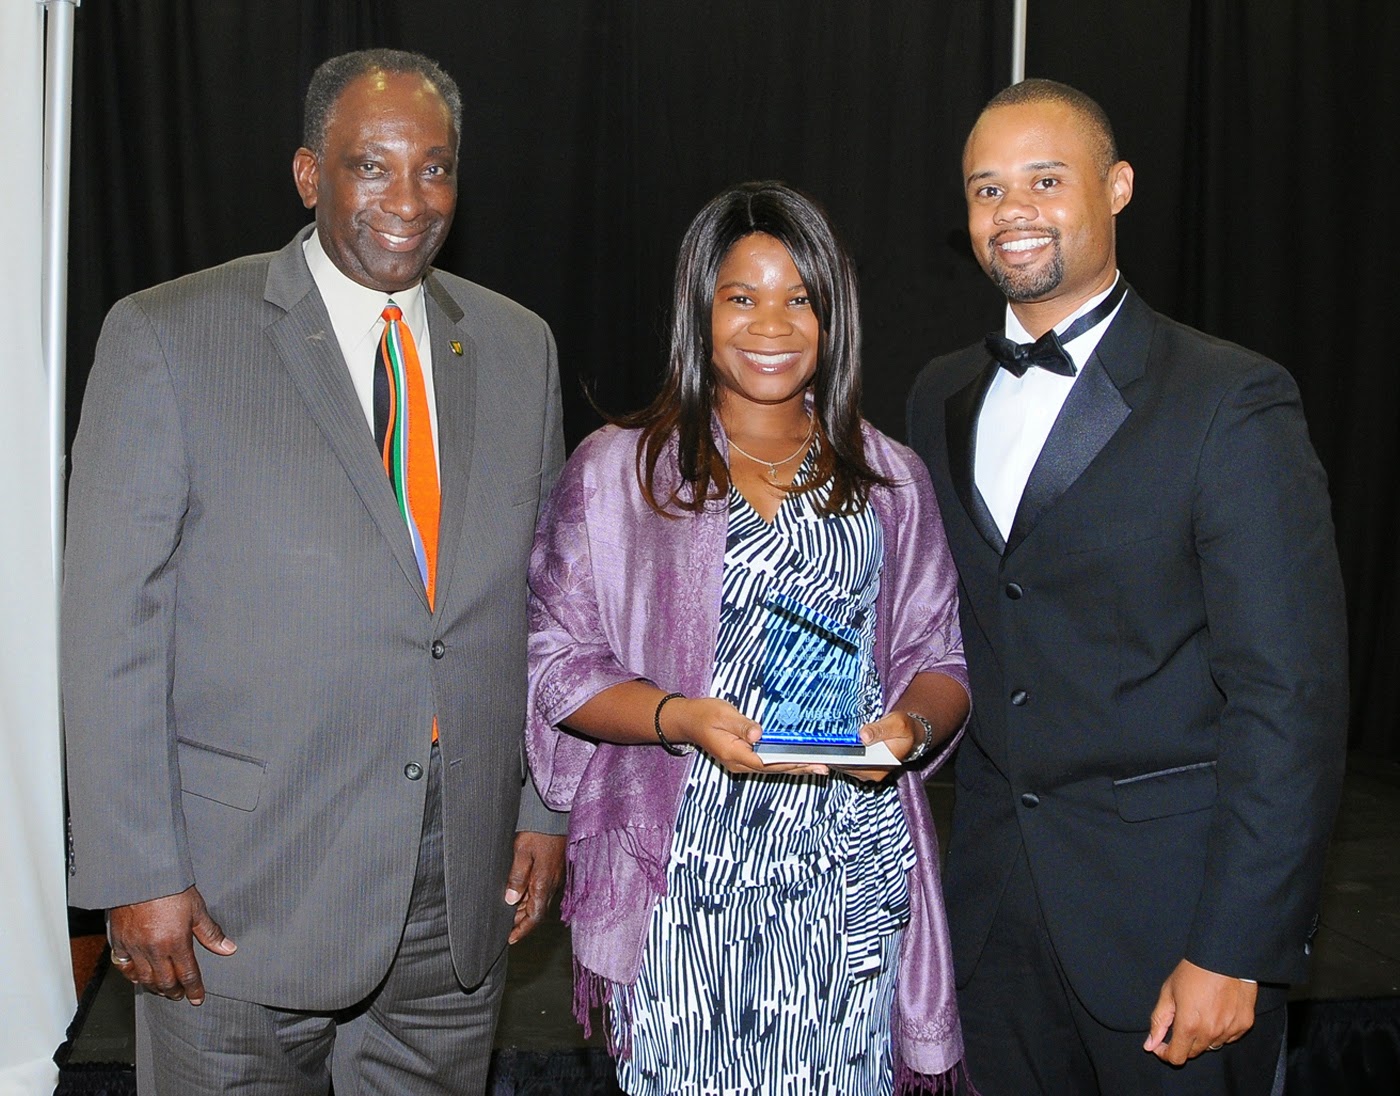 FAMU receives two top honors at 2014 HBCU Awards